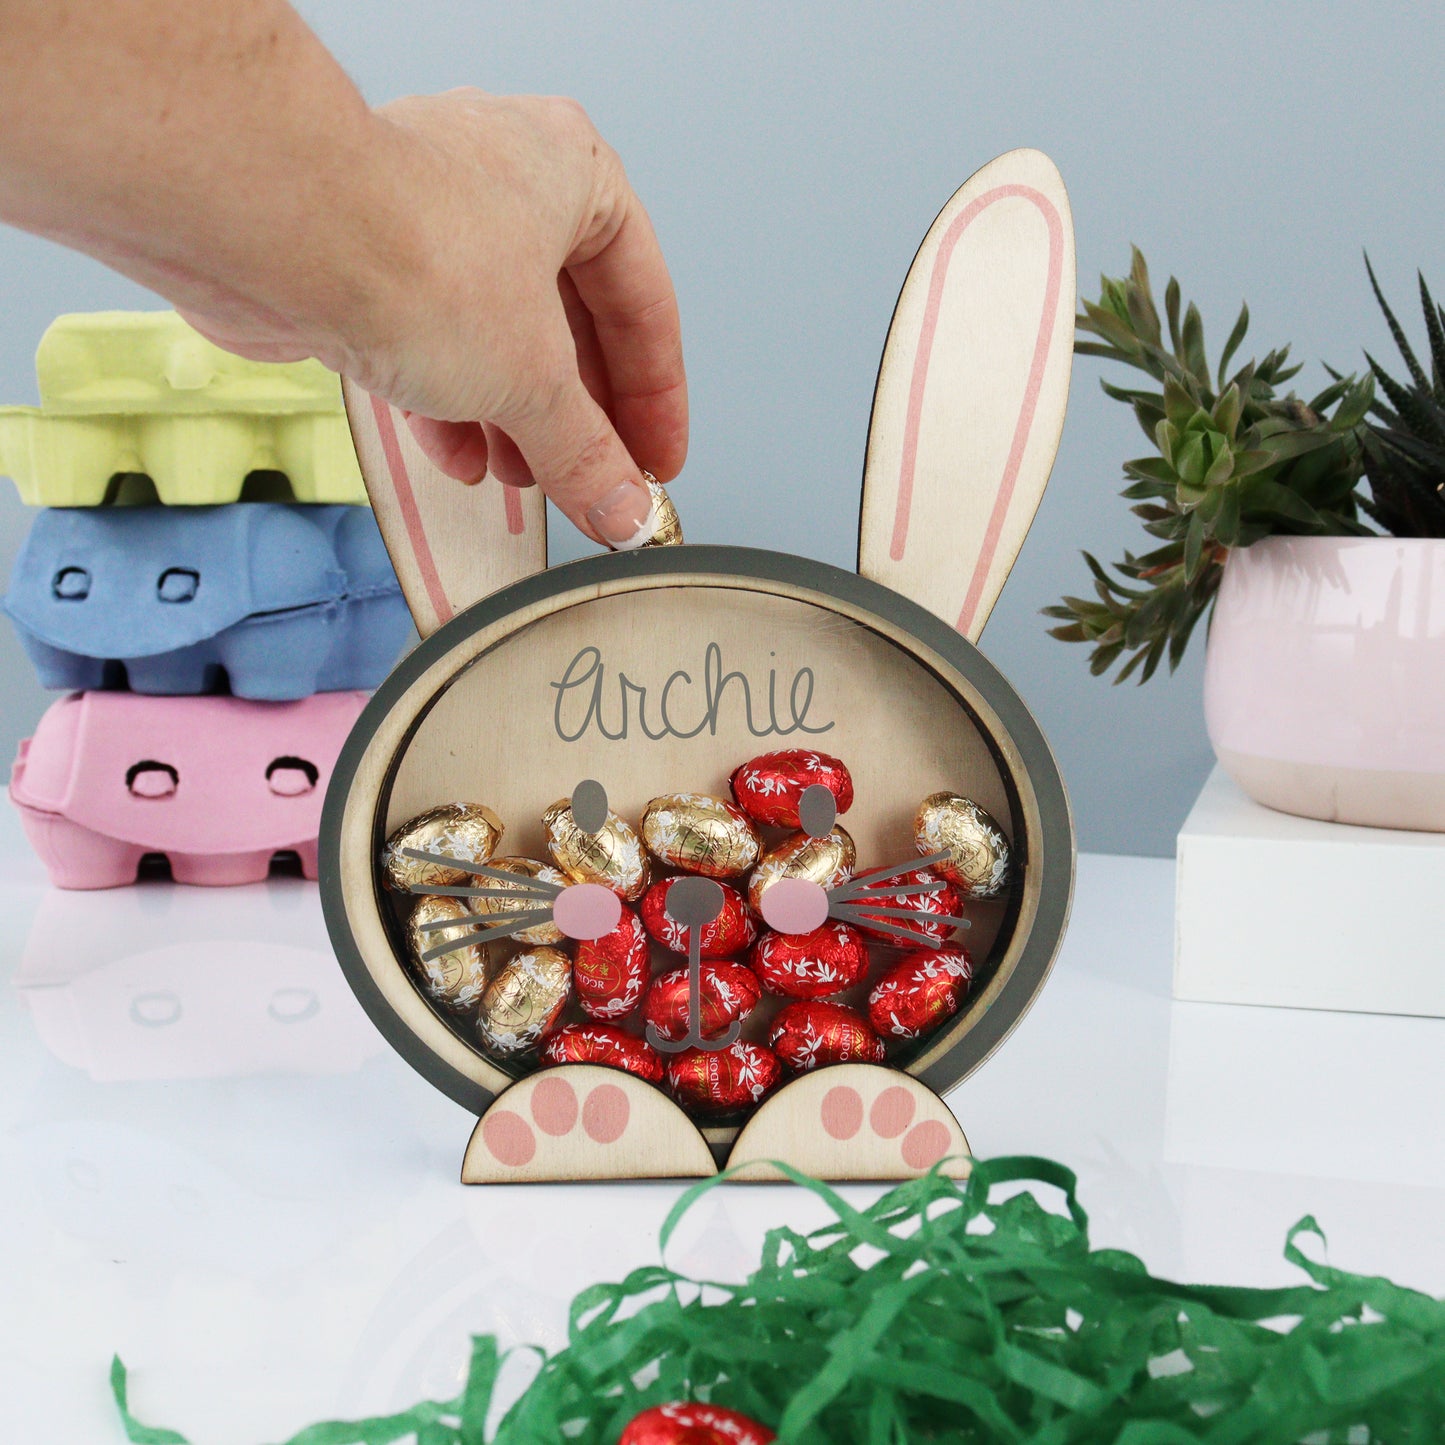 Personalised Wooden Easter Bunny With Gold Foiled Eggs